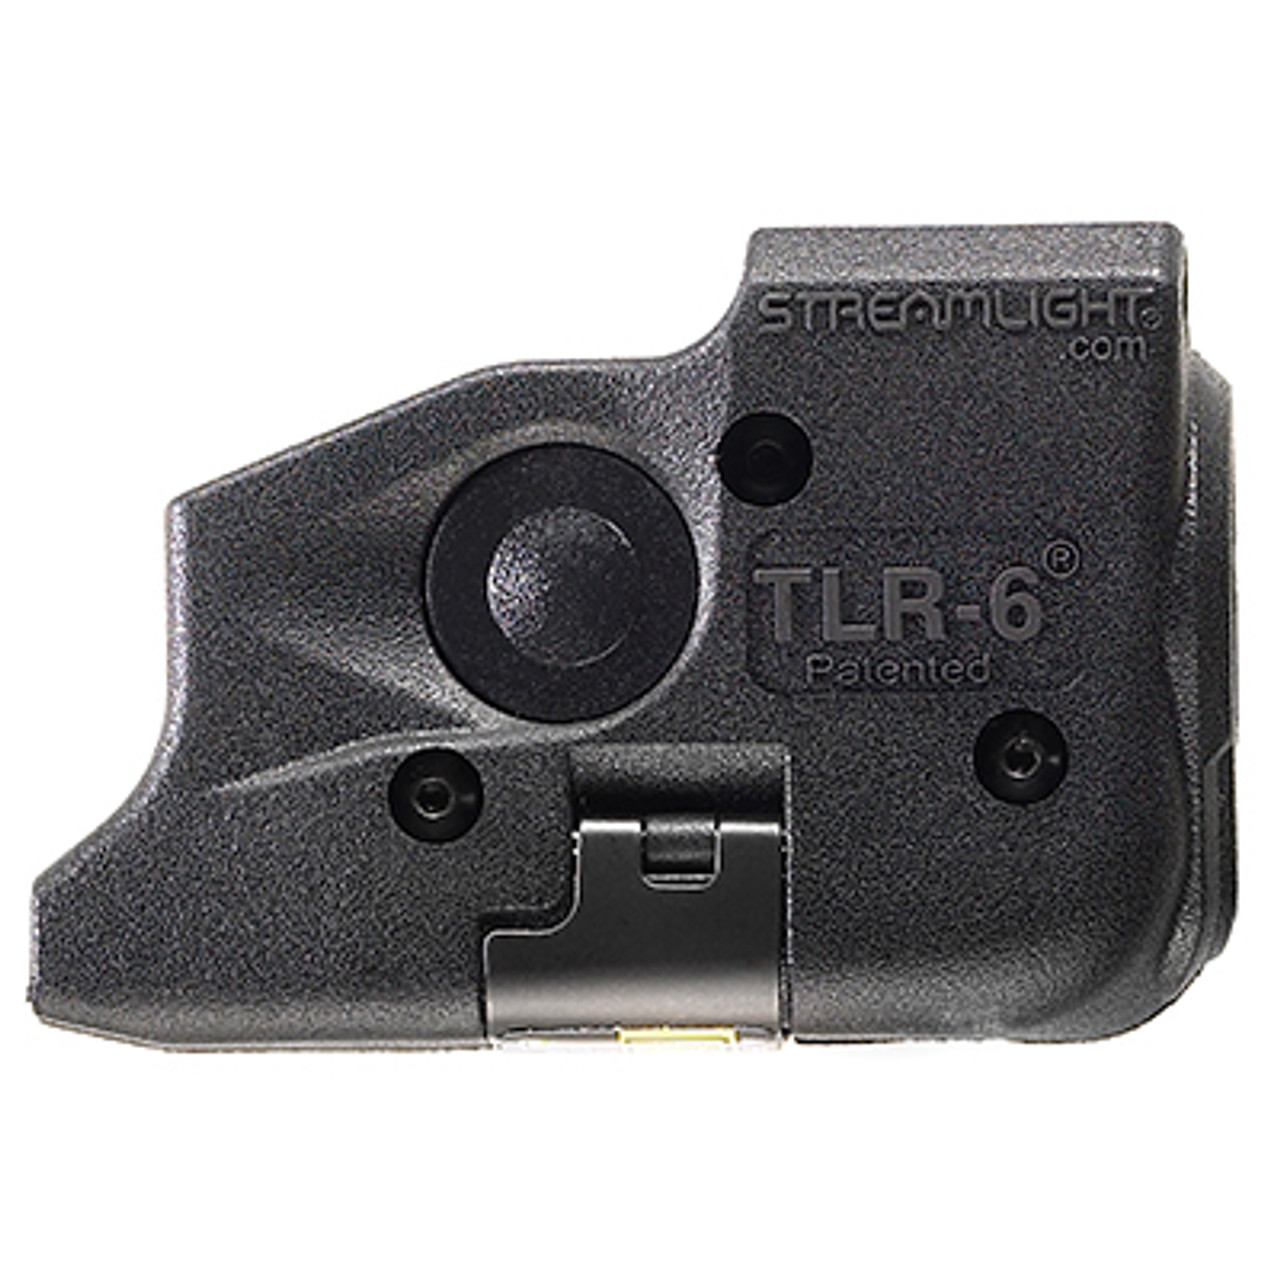 Streamlight 69277 TLR-6 Universal Kit - includes LED/laser module and select TLR-6 body housings, sold as 1 unit - DSS